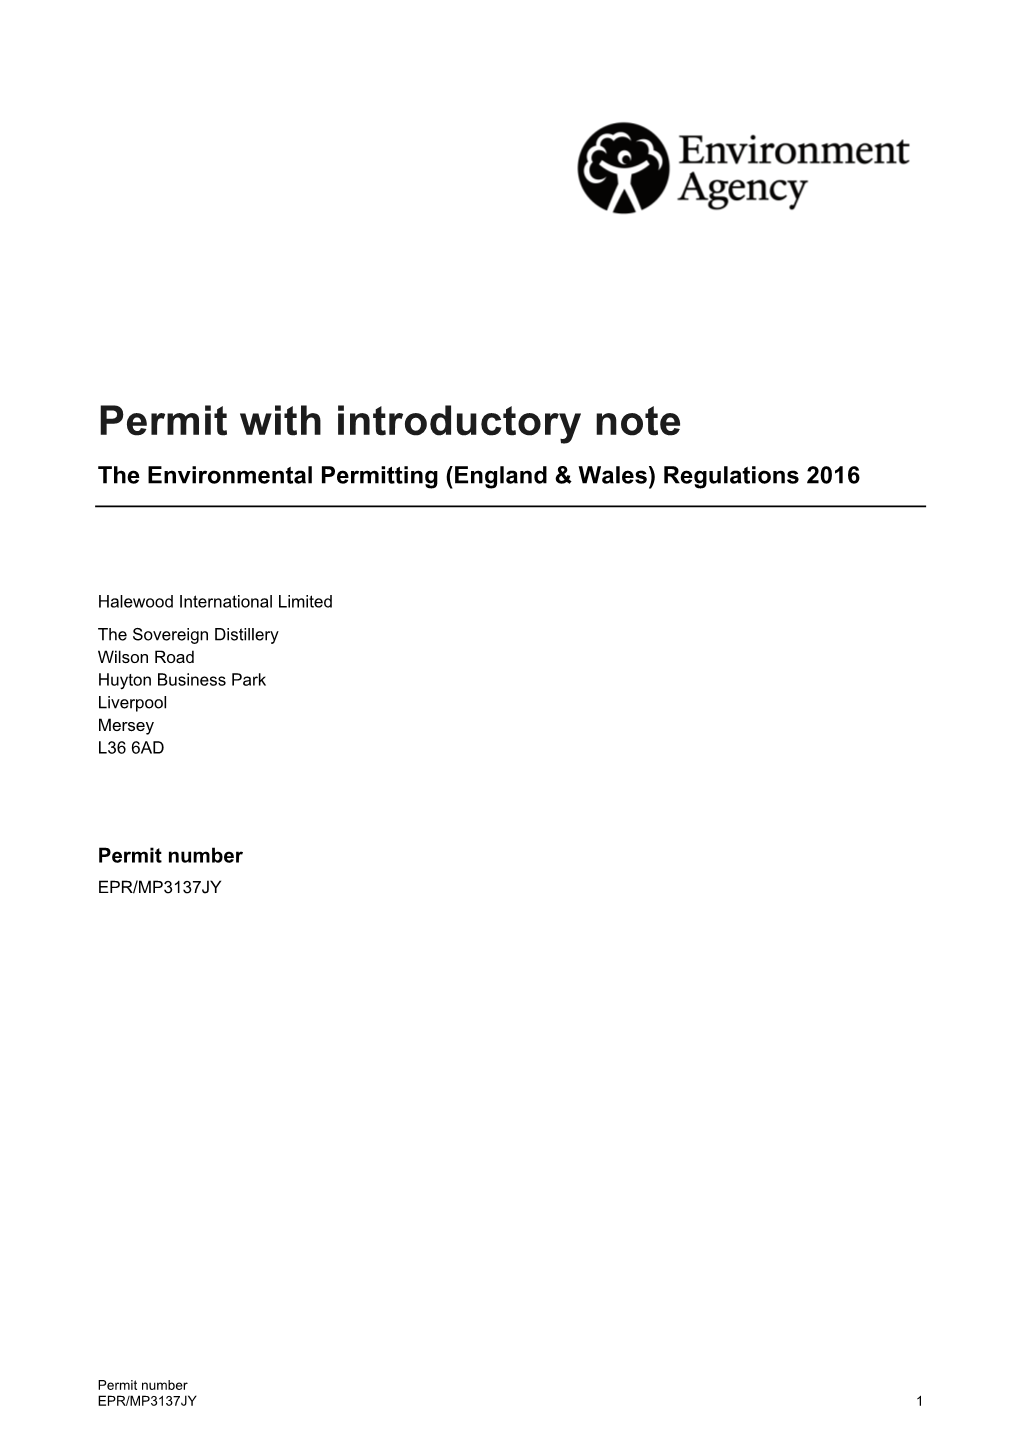 Permit with Introductory Note the Environmental Permitting (England & Wales) Regulations 2016